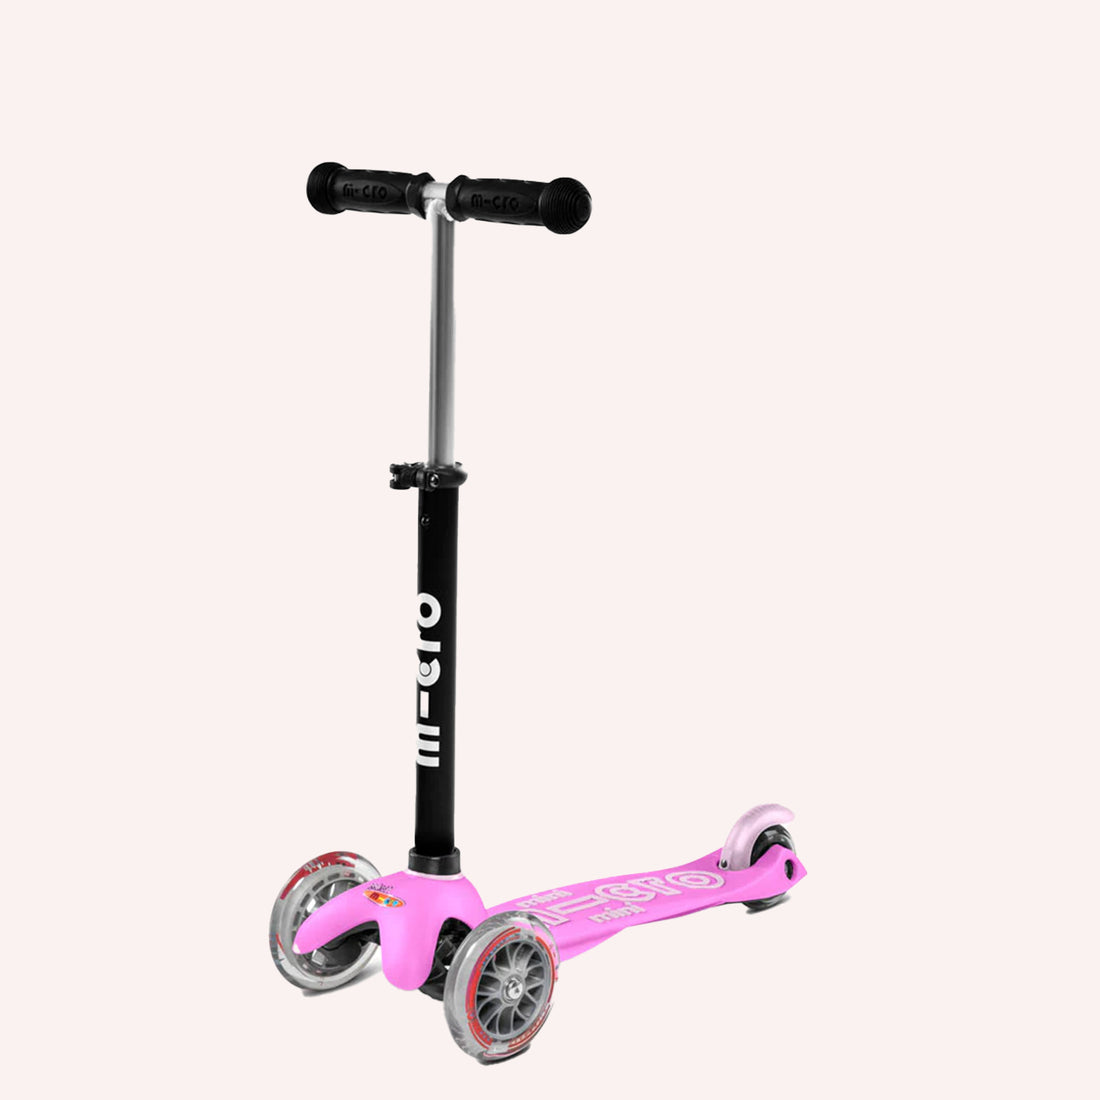 Mini2go Deluxe Plus Ride On Scooter - Pink